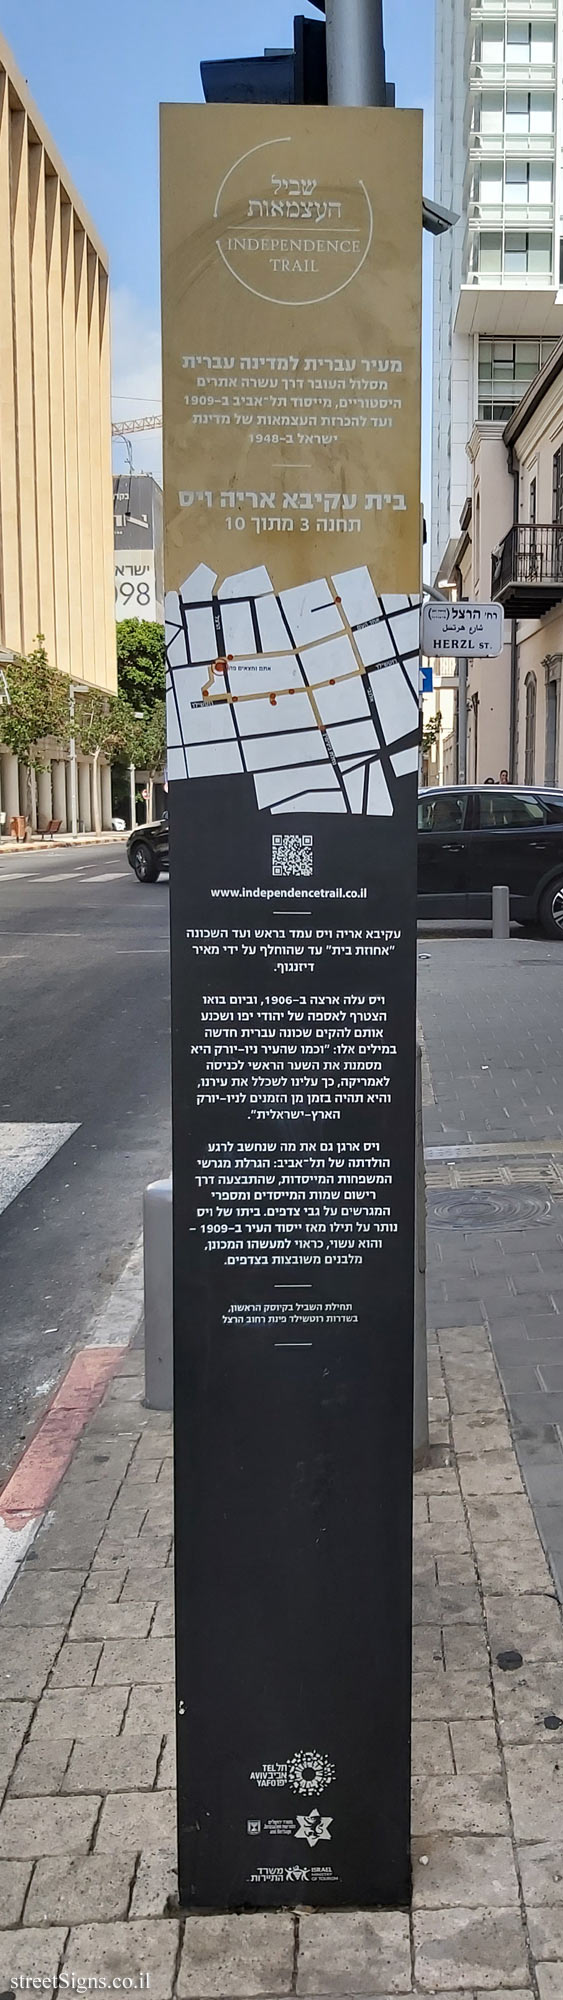 Tel Aviv - Independence Trail - Akiva Arieh Weiss House - Information